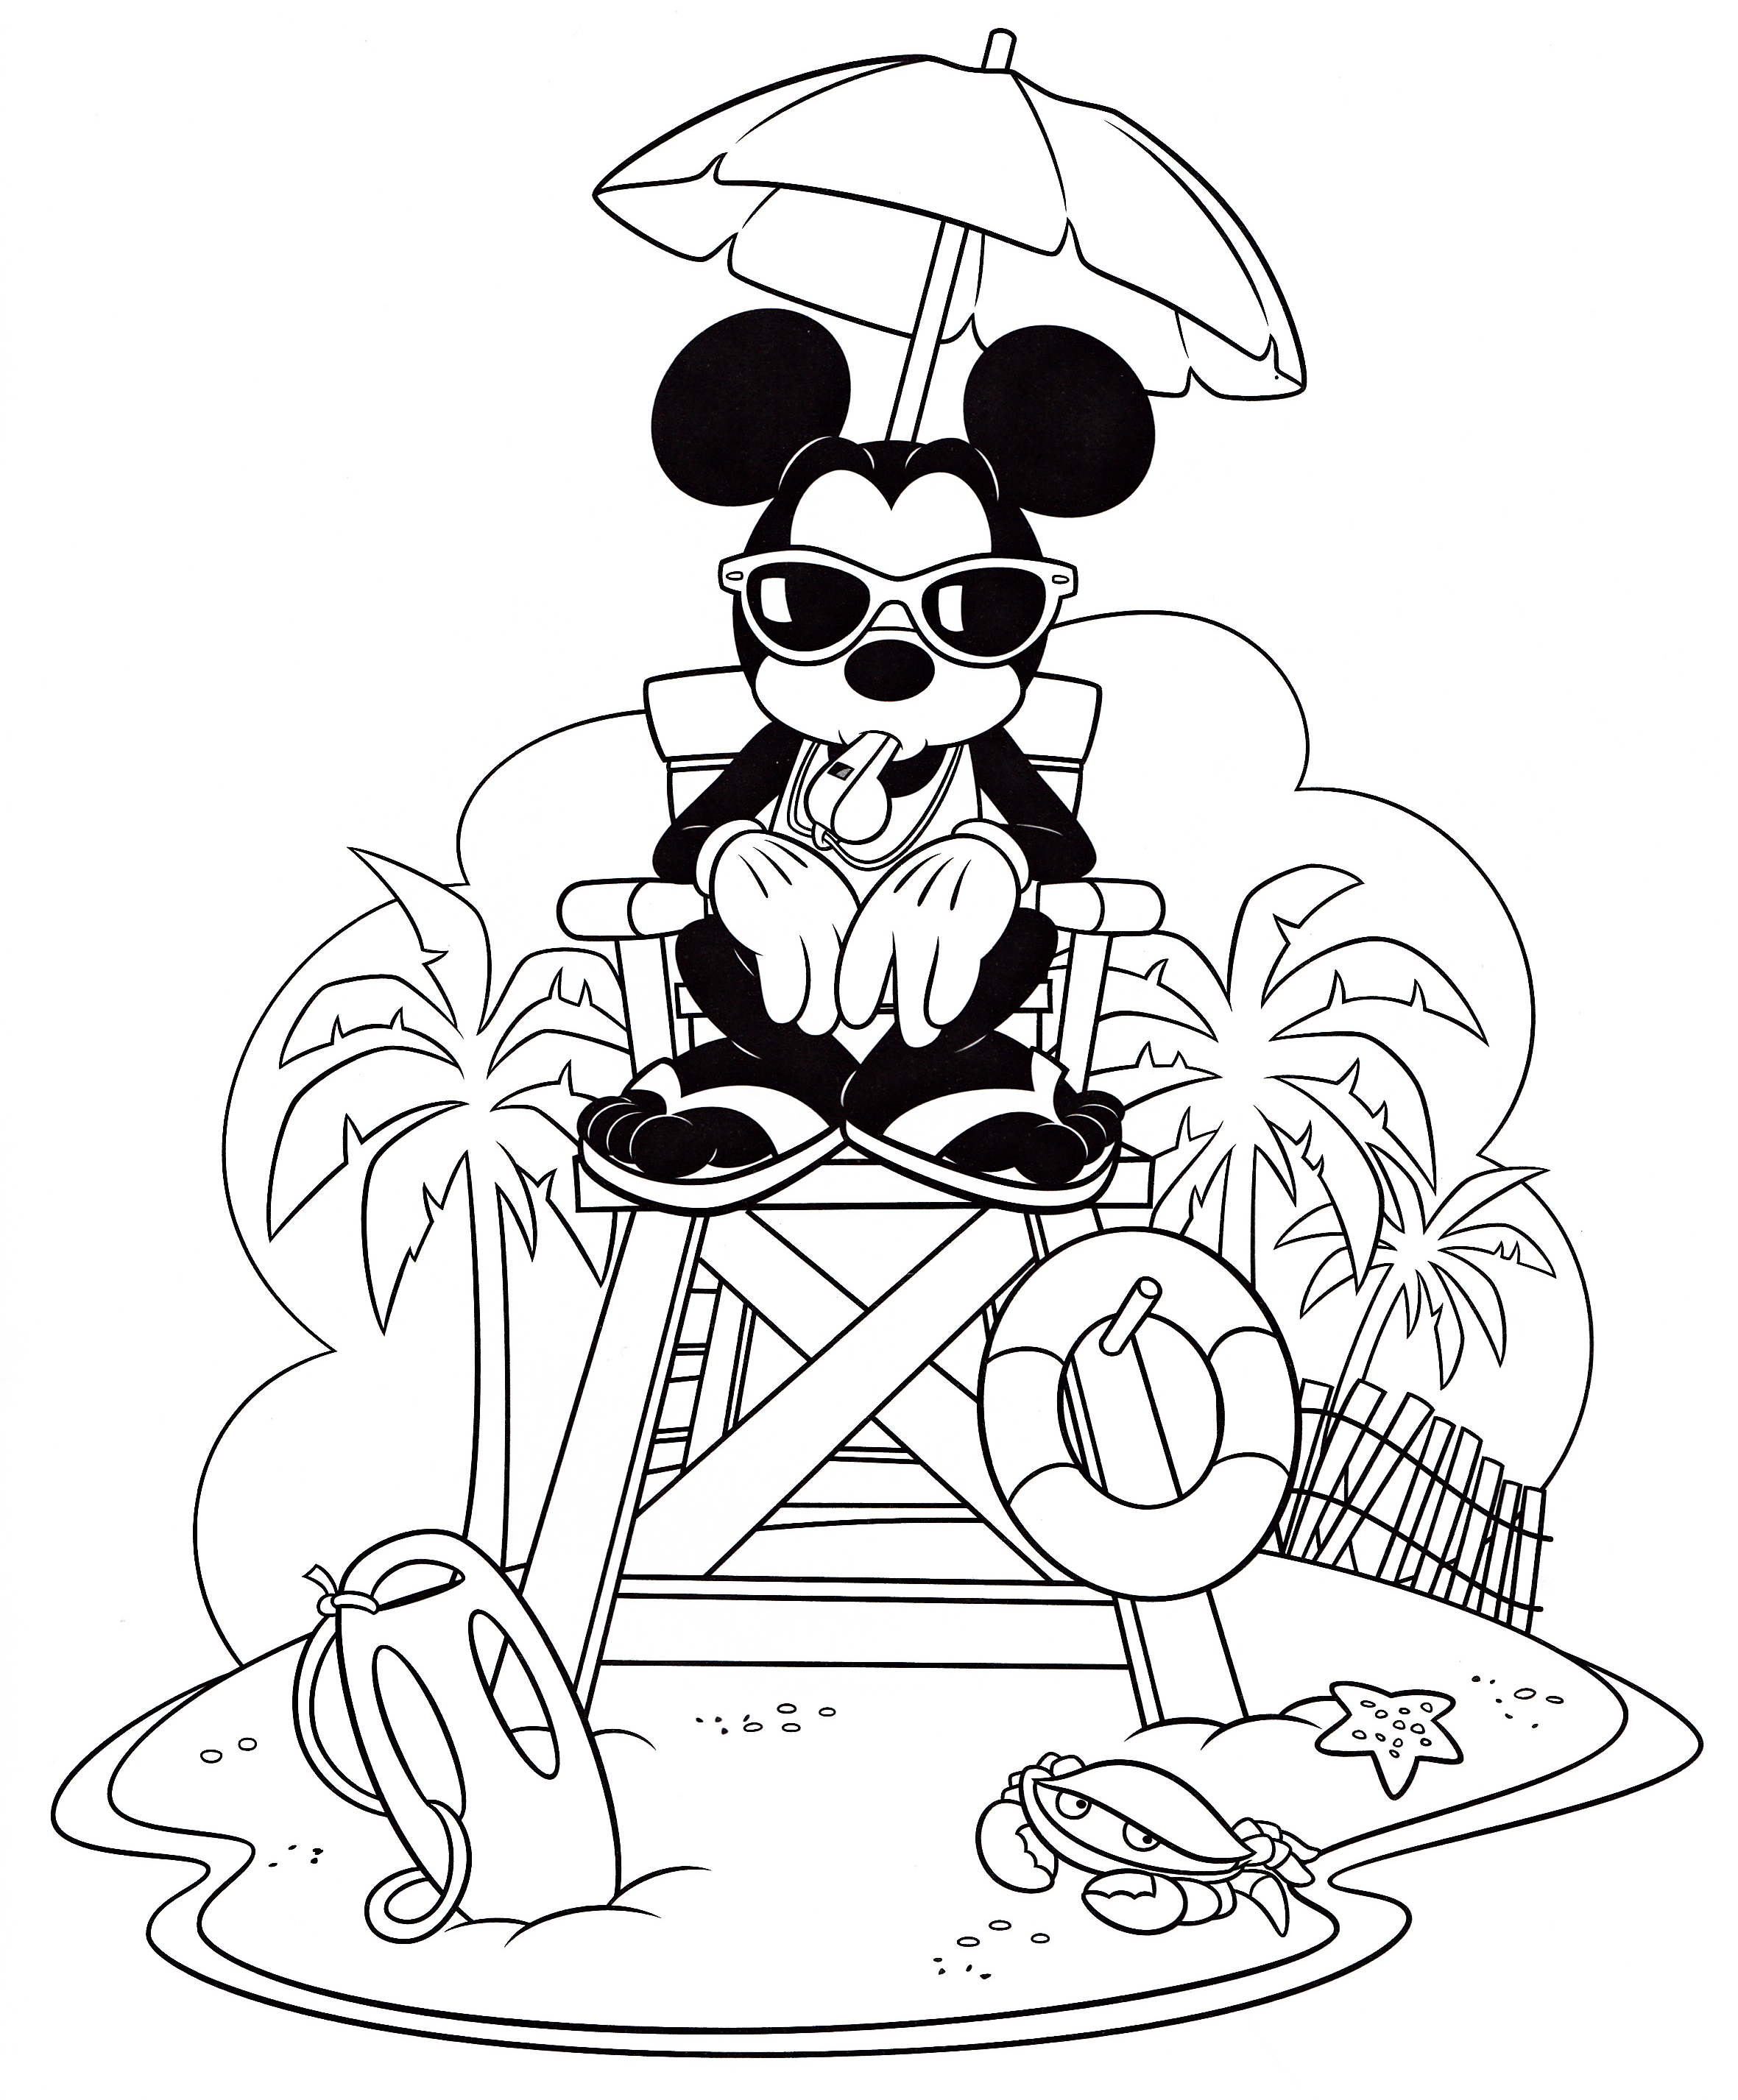 Walt Disney Coloring Pages Mickey Mouse Walt Disney Characters Photo 40227327 Fanpop